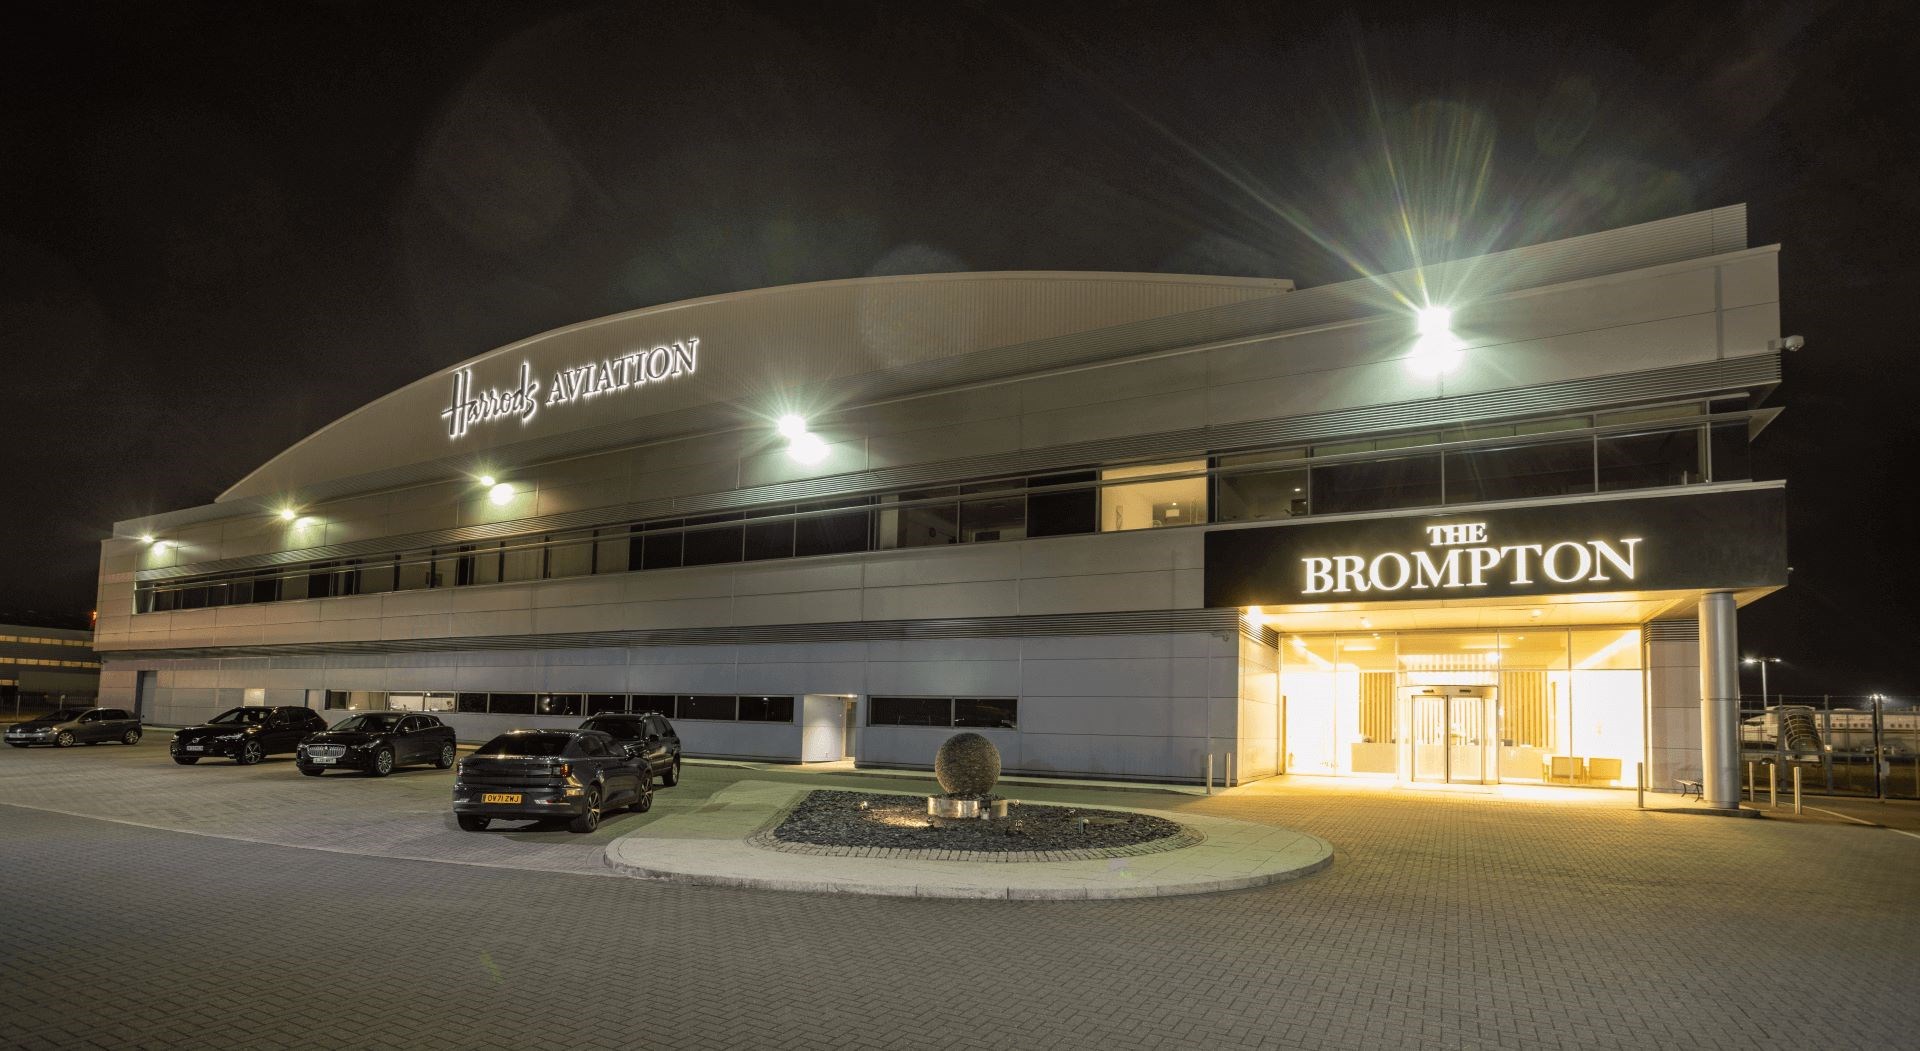 Illuminated Signage The Brompton At Harrods Aviation London Stansted Airport (1)3